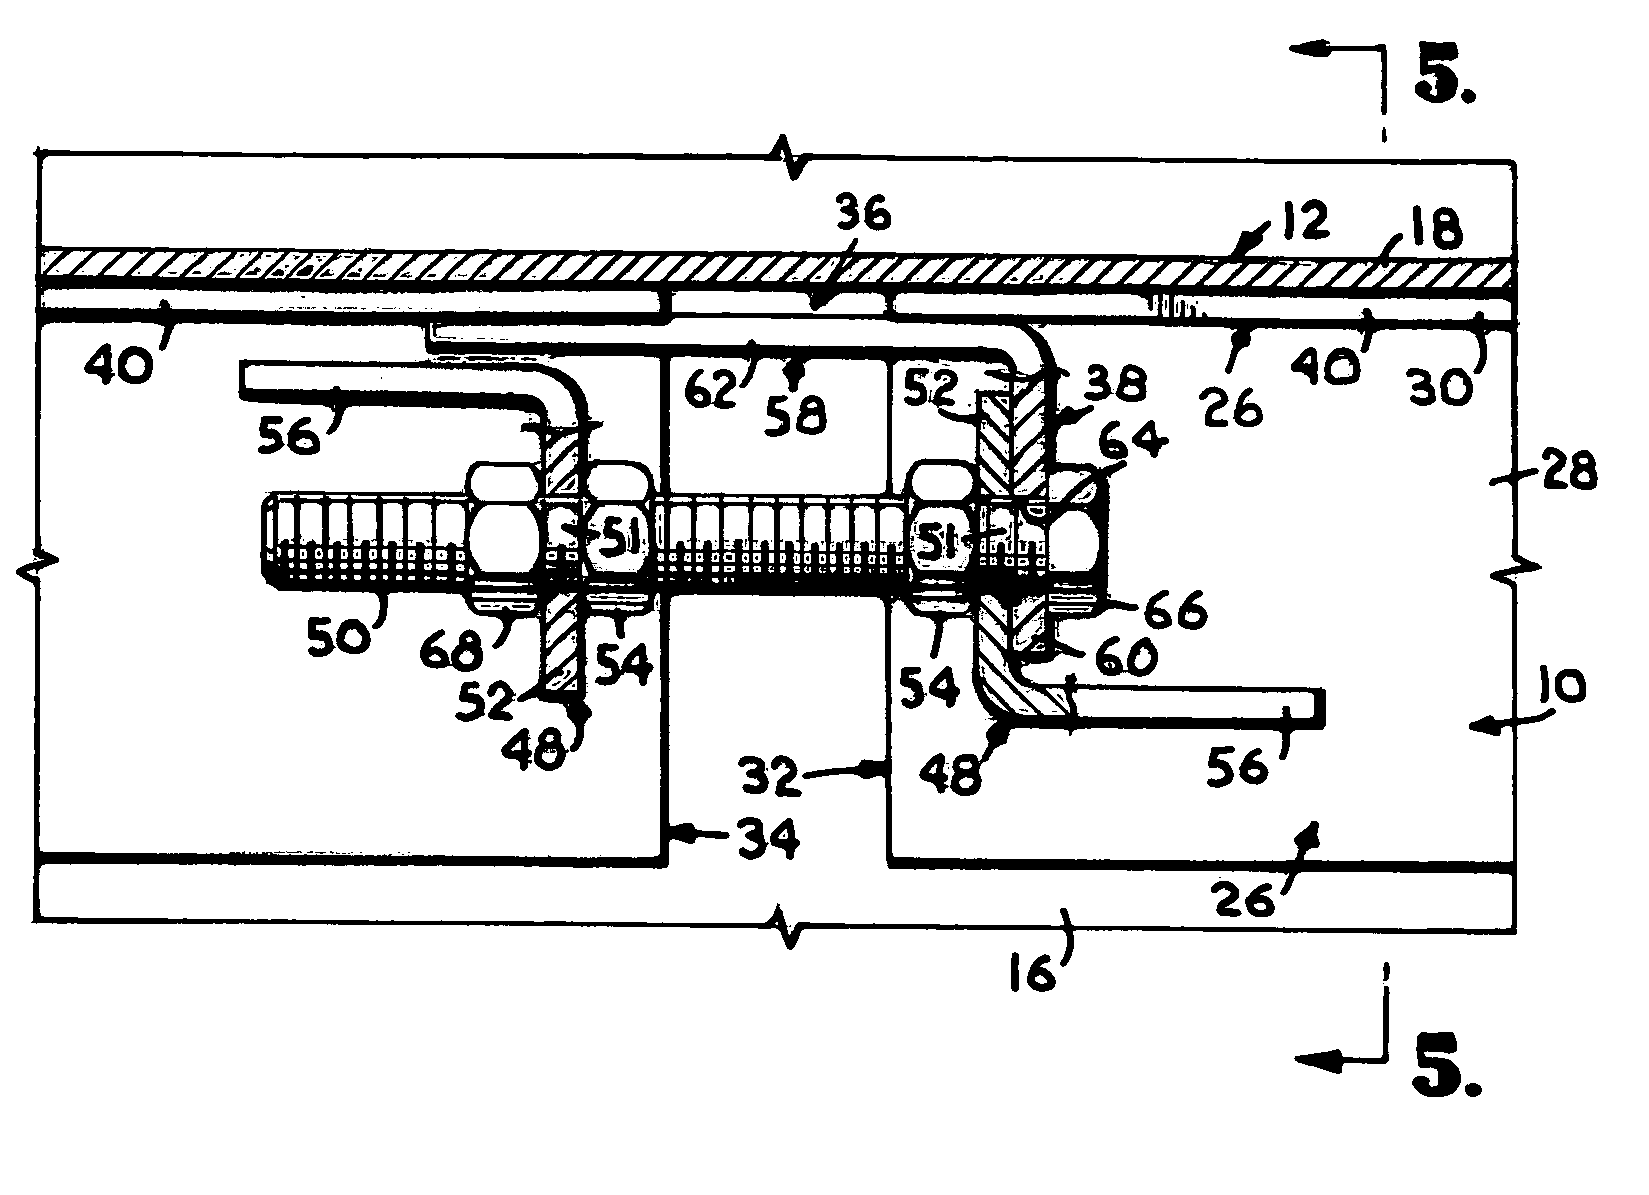 Expansion ring for mass transfer column and method employing same